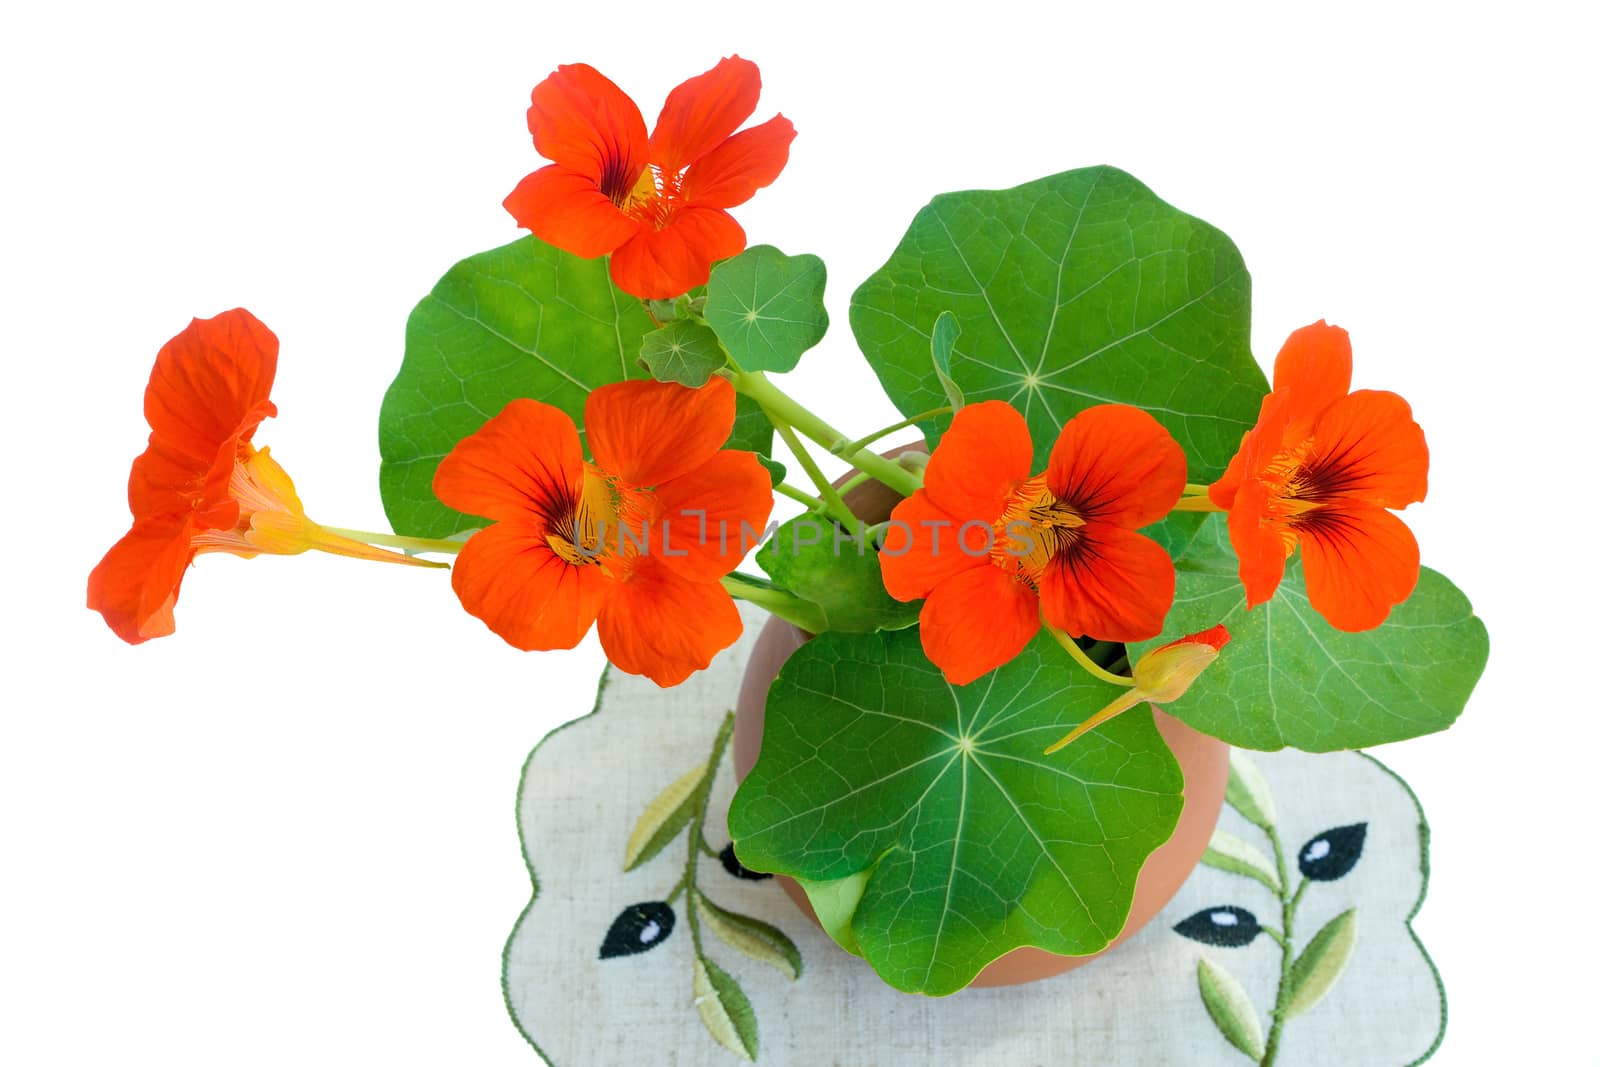 Bright orange flowers of a nasturtium with roundish green leaves in a ceramic vase. Are presented on a white background.